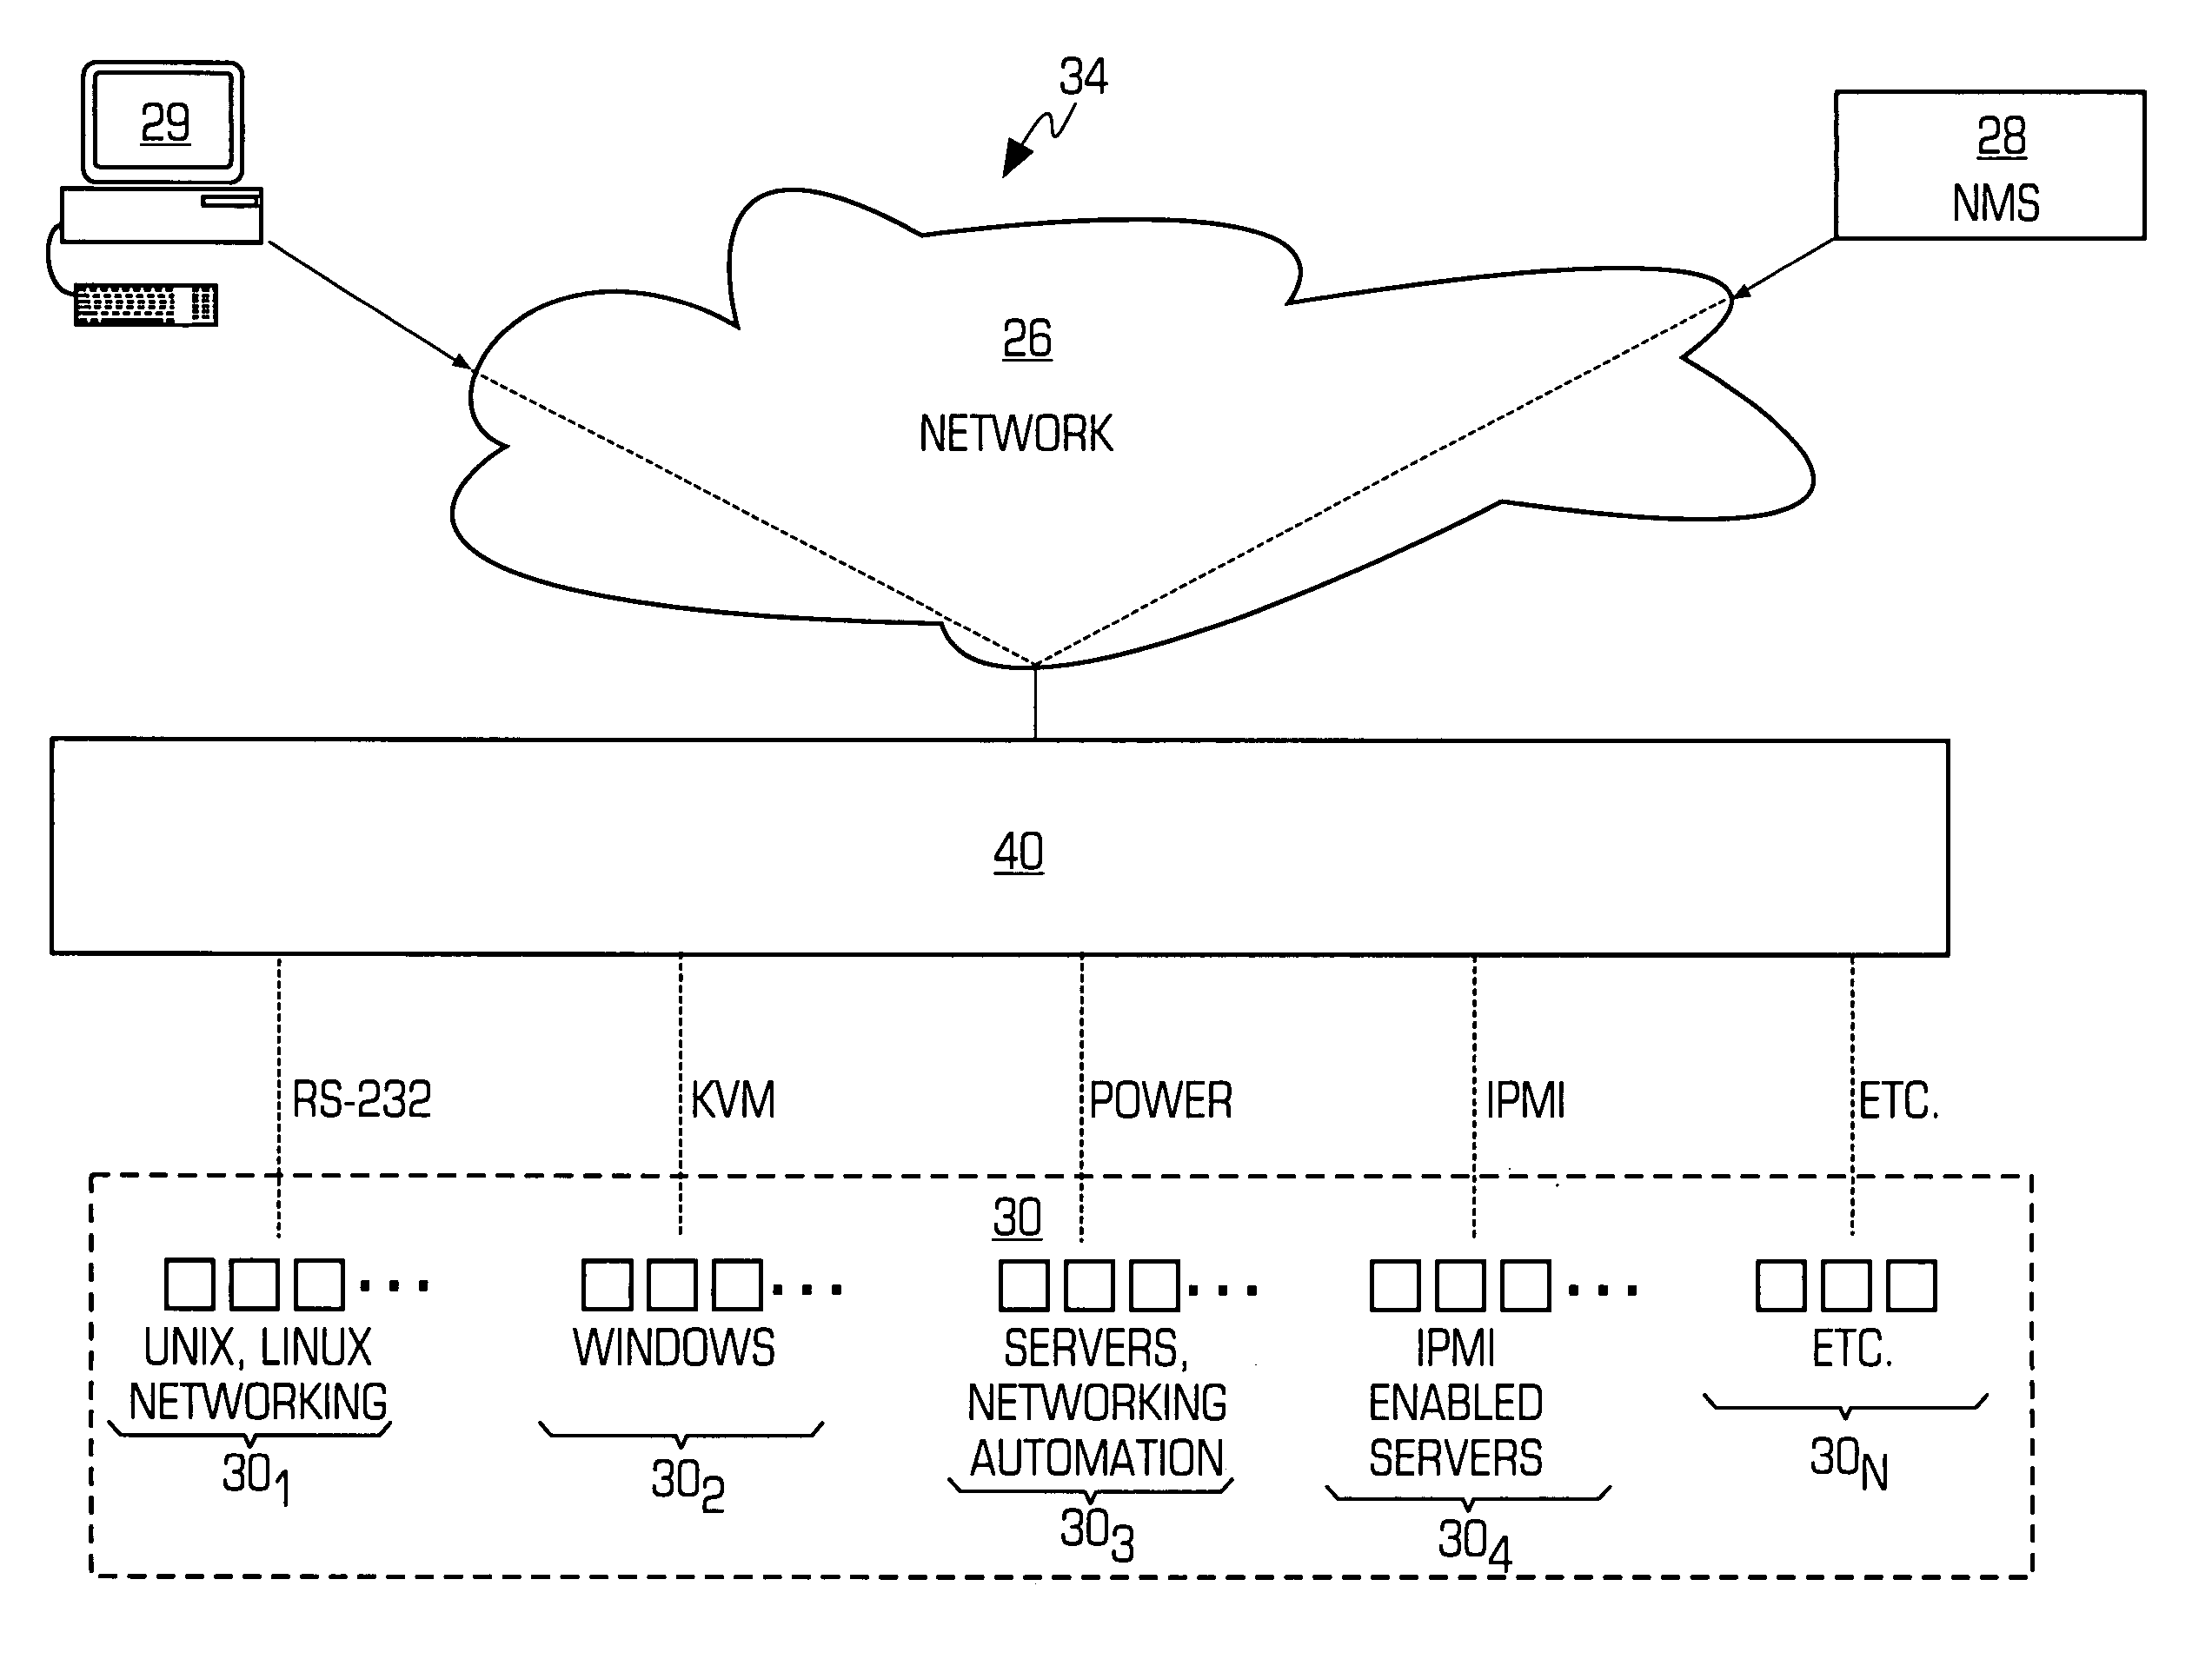 System and method for consolidating, securing and automating out-of-band access to nodes in a data network